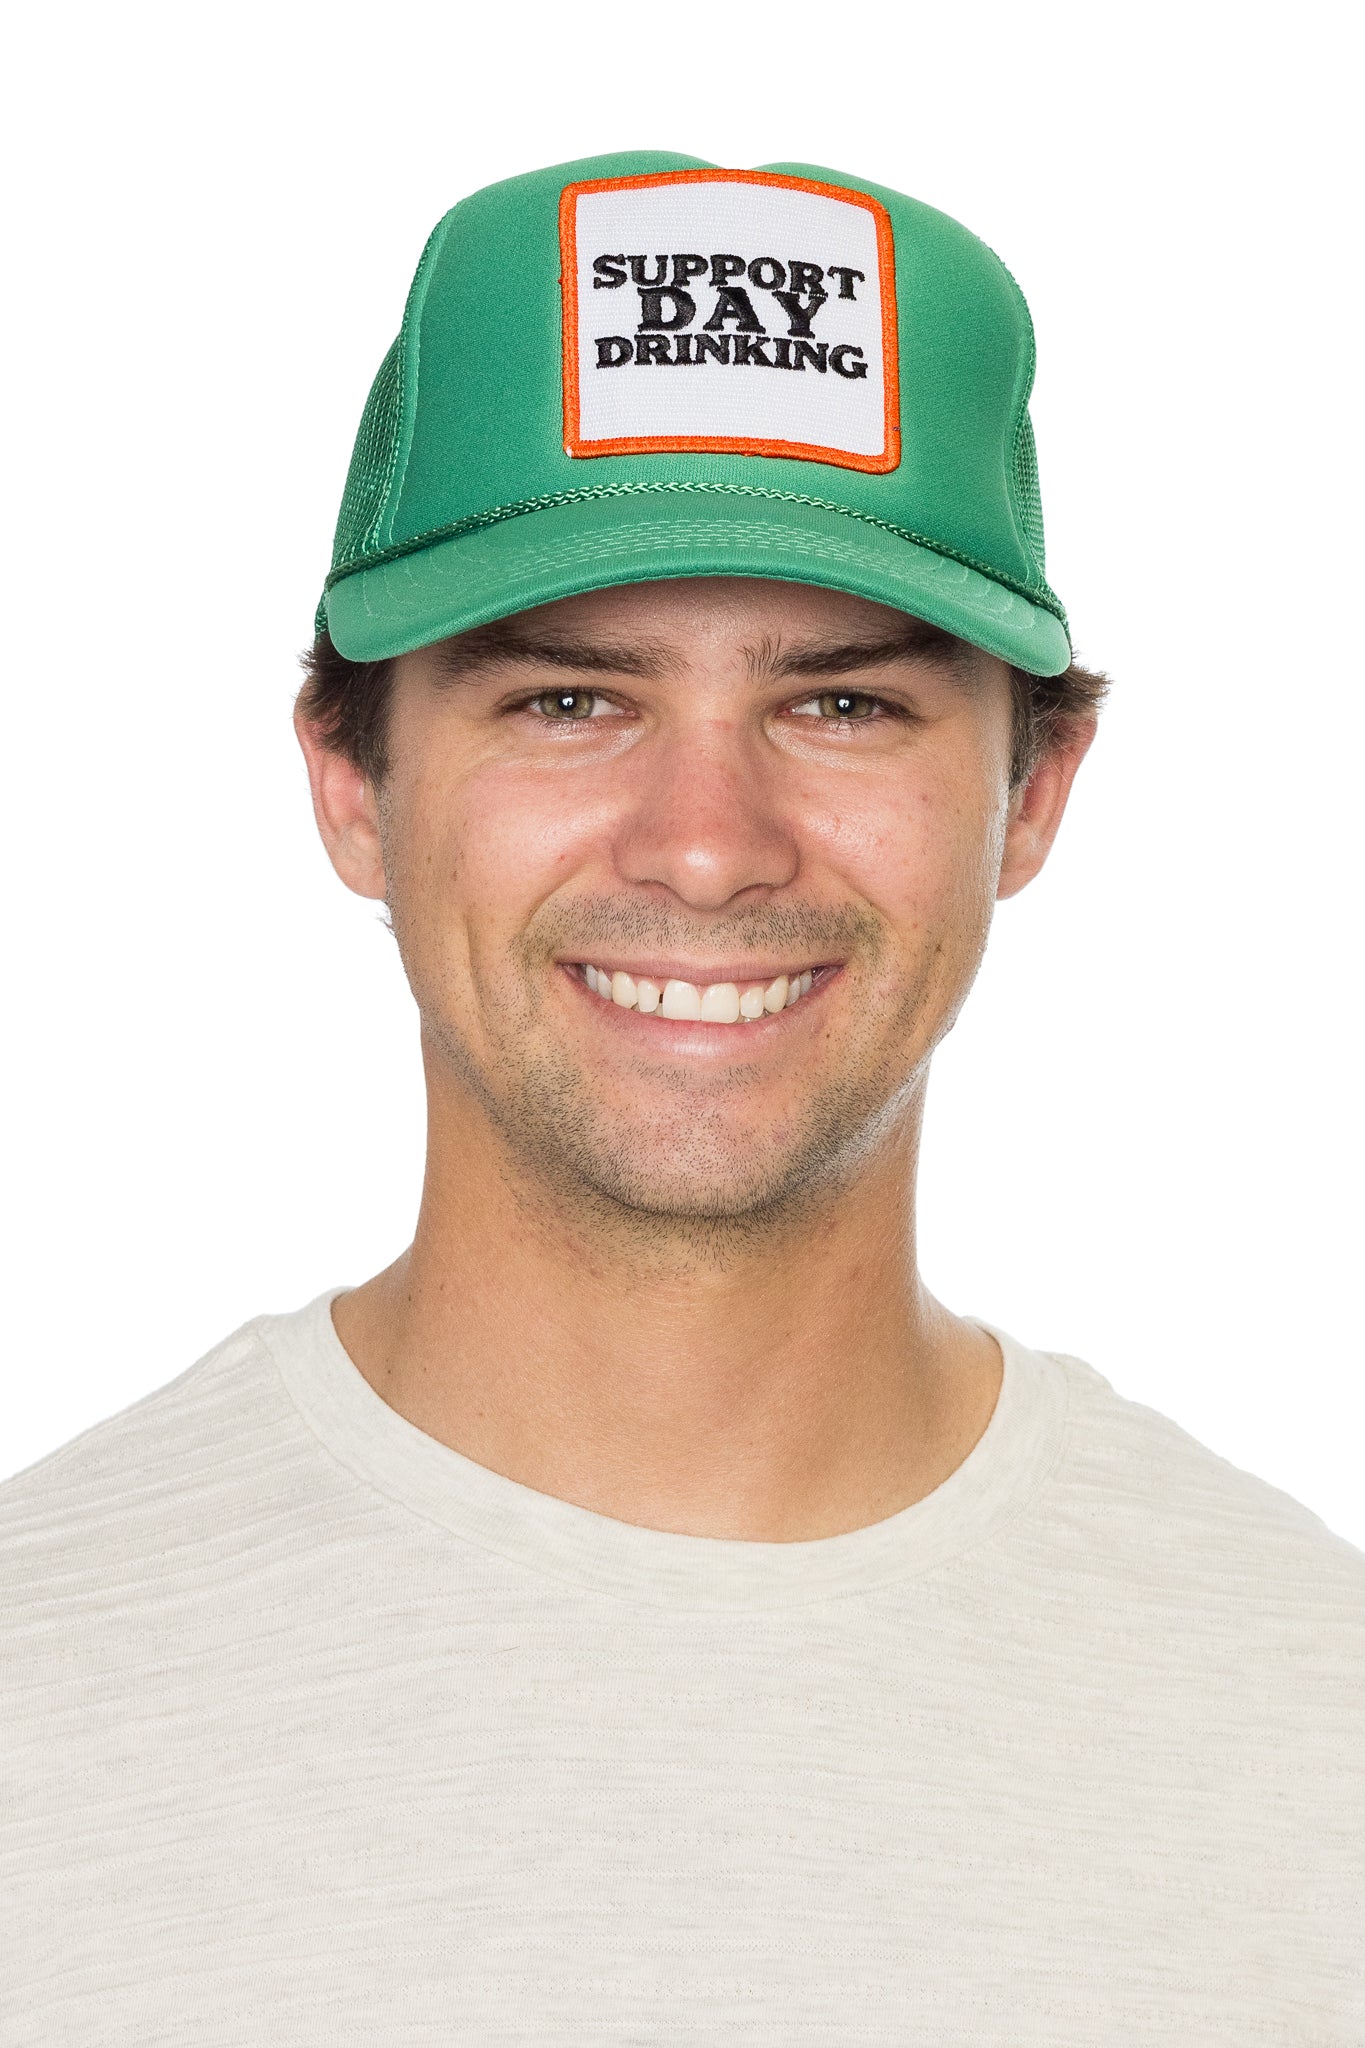 Support Day Drinking Trucker Hat in Green